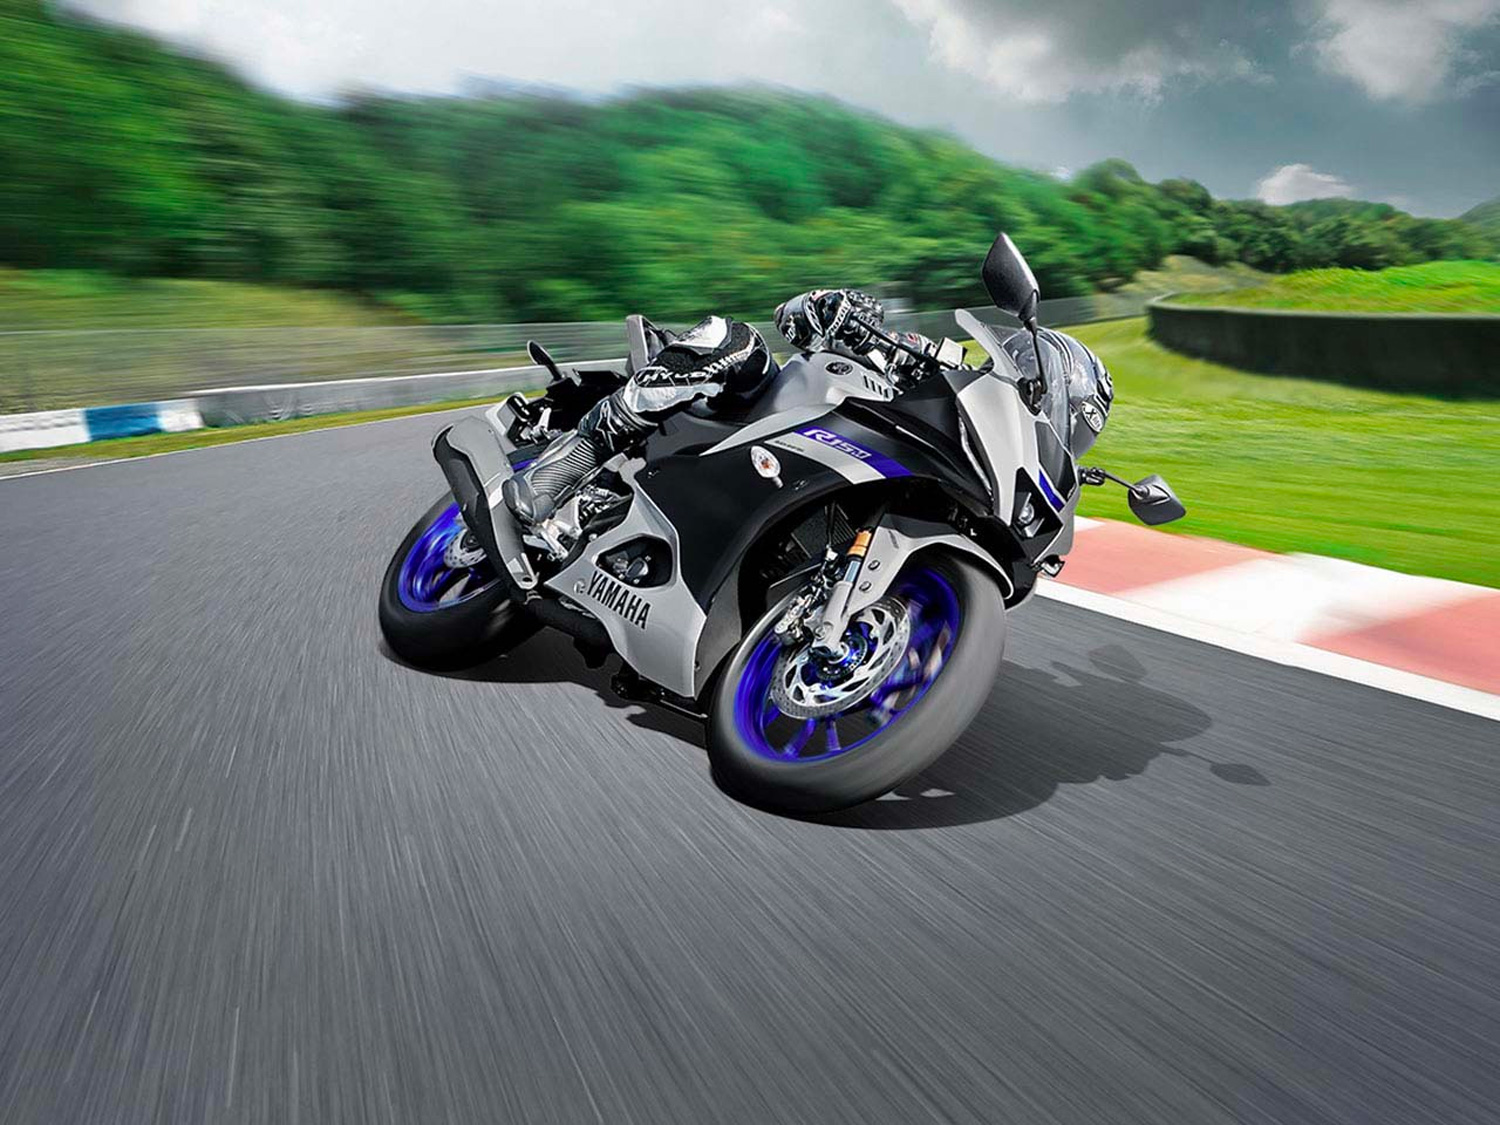 Yamaha's 2023 YZF-R15M motorcycle on a racetrack